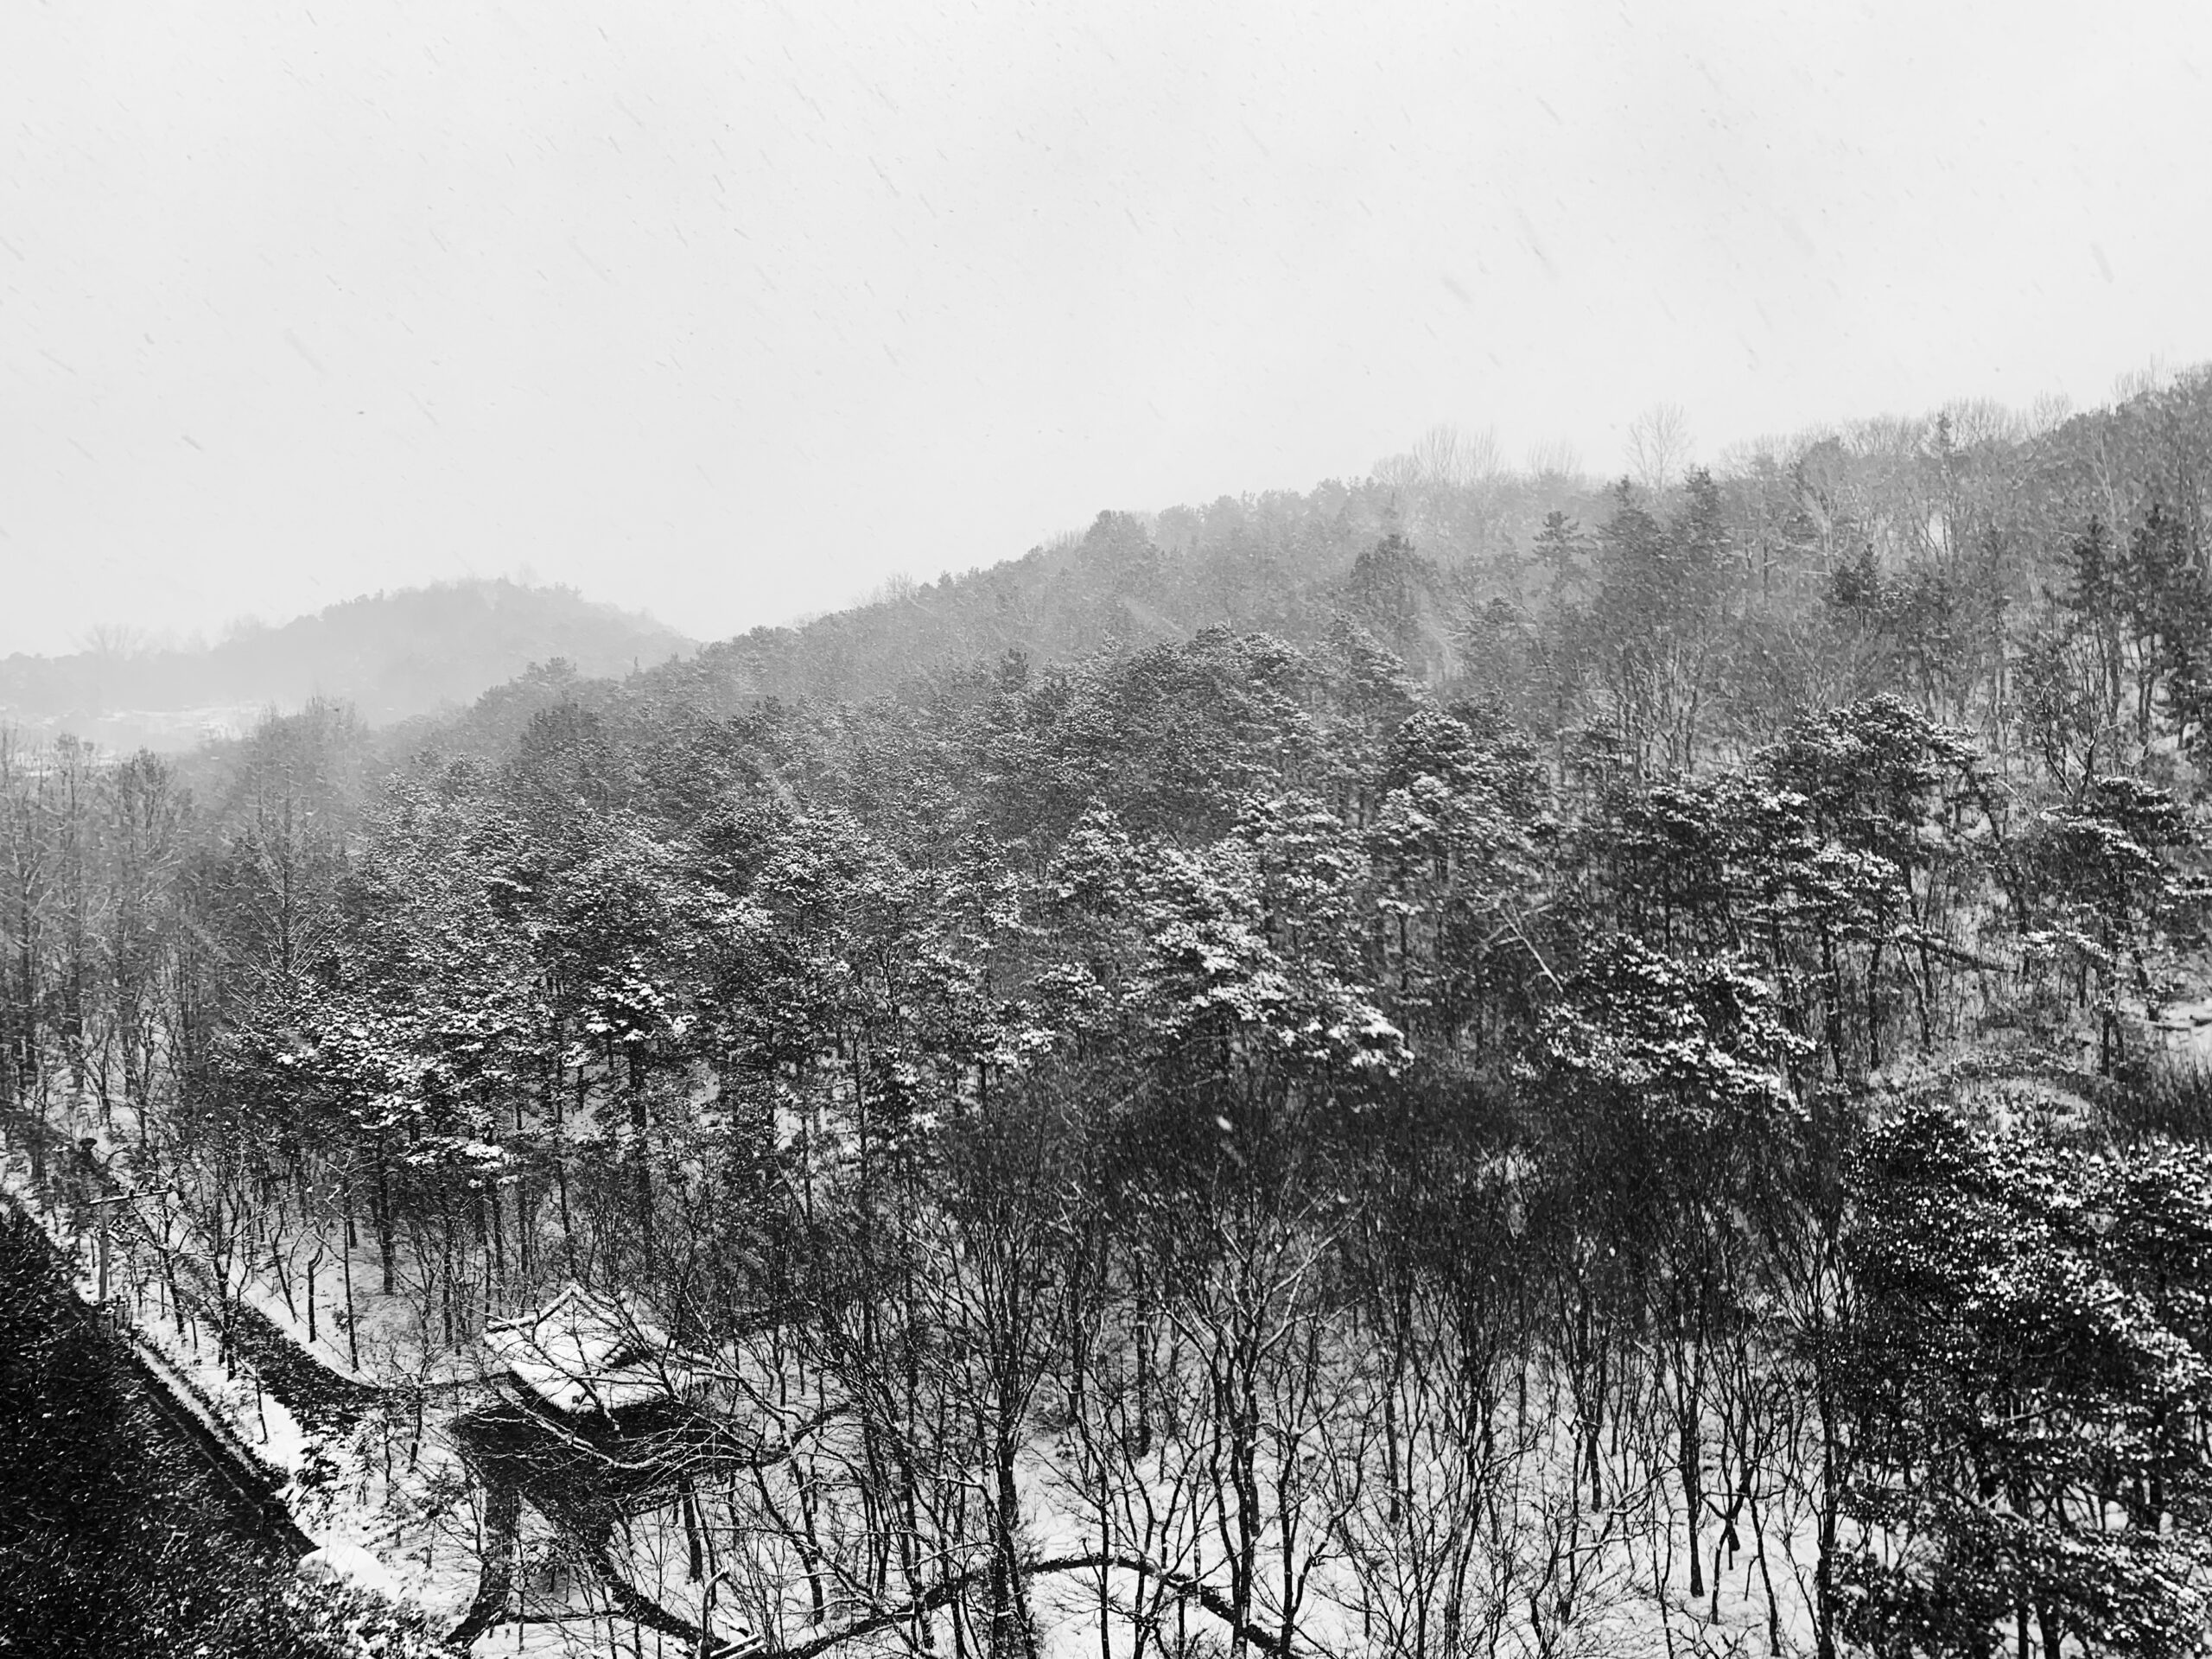 A black and white photo capturing the chilly winter season in Korea.